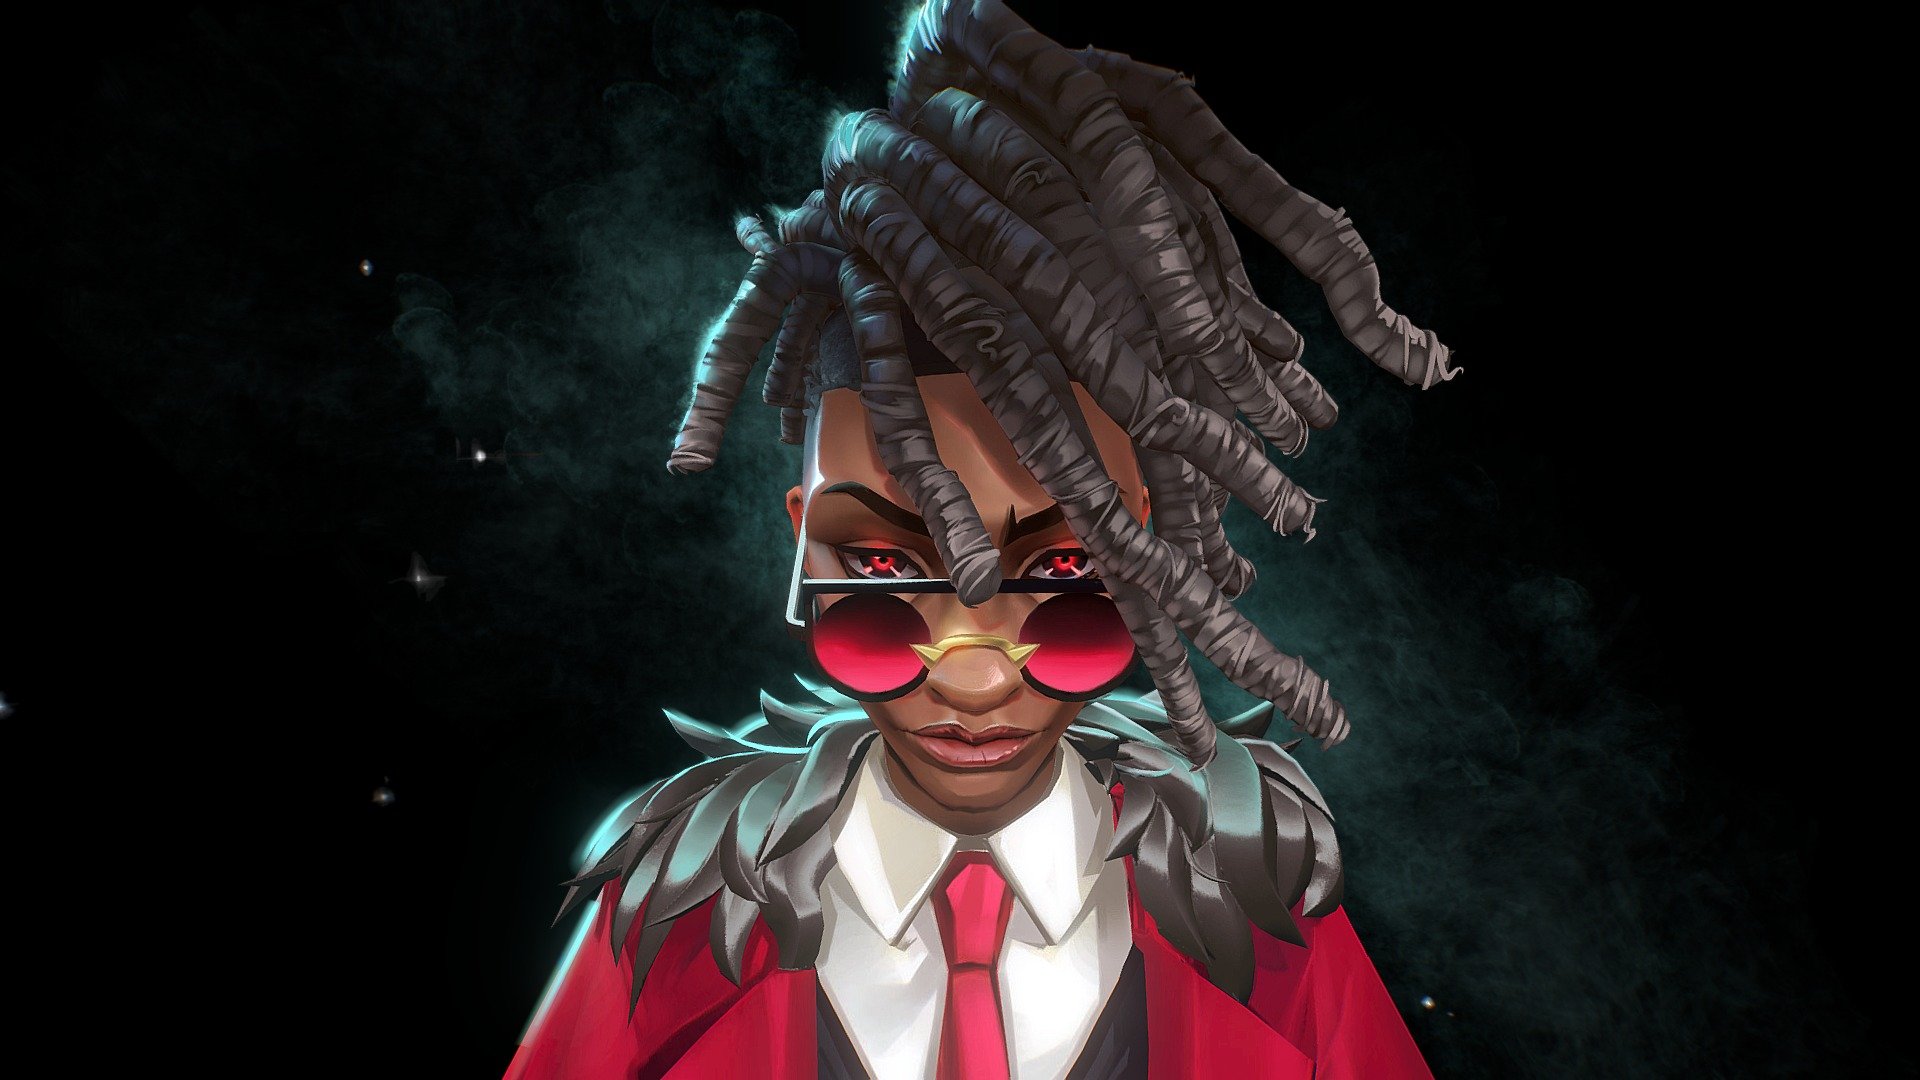 Original concept by  Sasha Tudvaseva ( https://www.artstation.com/artwork/9m0lvv) 

I sculpted in zbrush,  hand painted the textures in Substance Painter and retopologized in Maya. 

My biggest goal in this project was interpreting hair locs within a hand painted framework. I took alot of inspiration from ekko and Fortiche's work in Arcane

full post on artstation : 

https://www.artstation.com/artwork/4X9Y52 - Vampire Mafia Boss - 3D model by Tyler Soo (@soolumy) 3d model